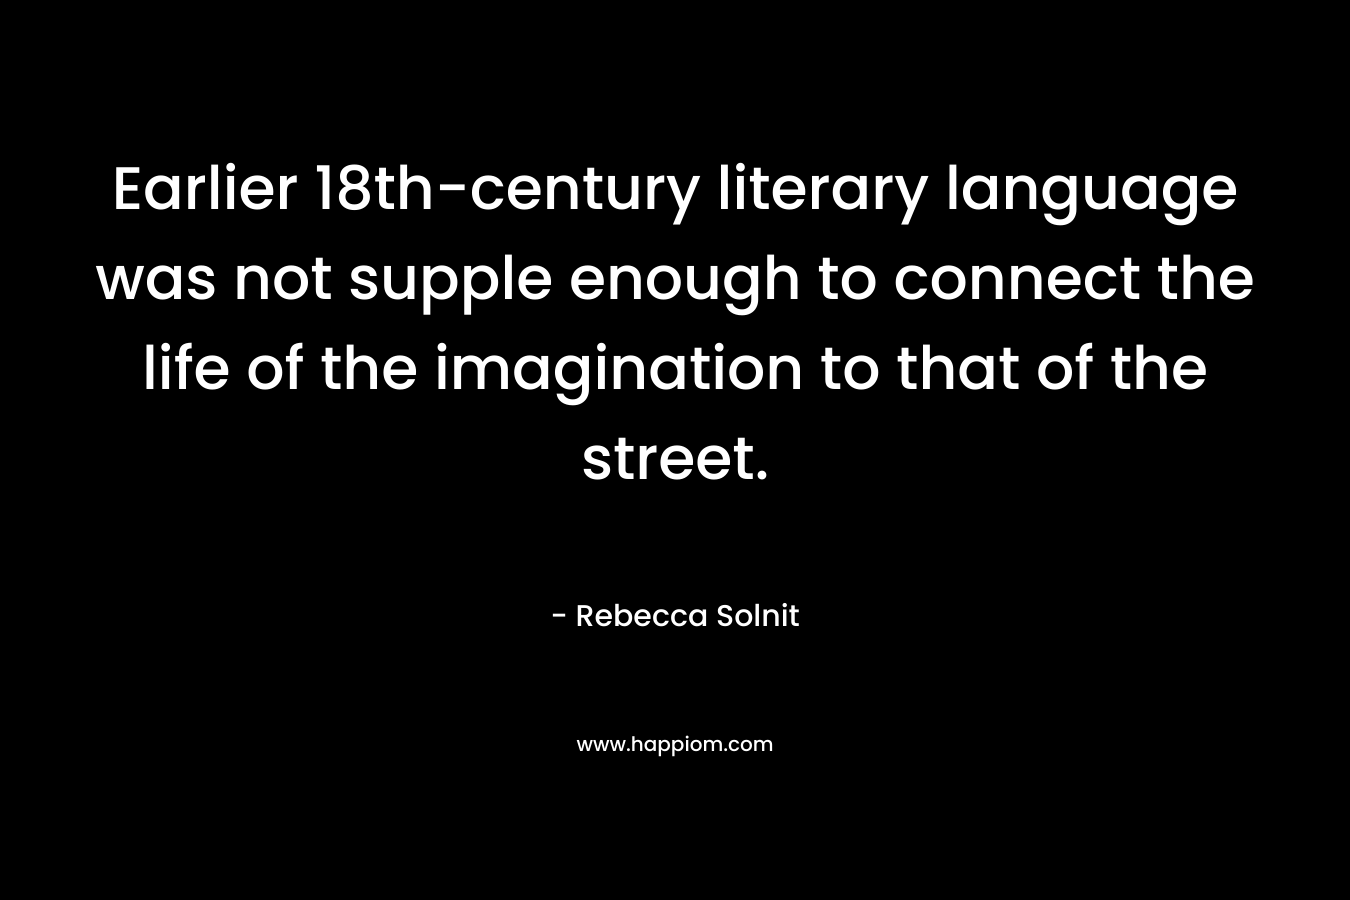 Earlier 18th-century literary language was not supple enough to connect the life of the imagination to that of the street. – Rebecca Solnit